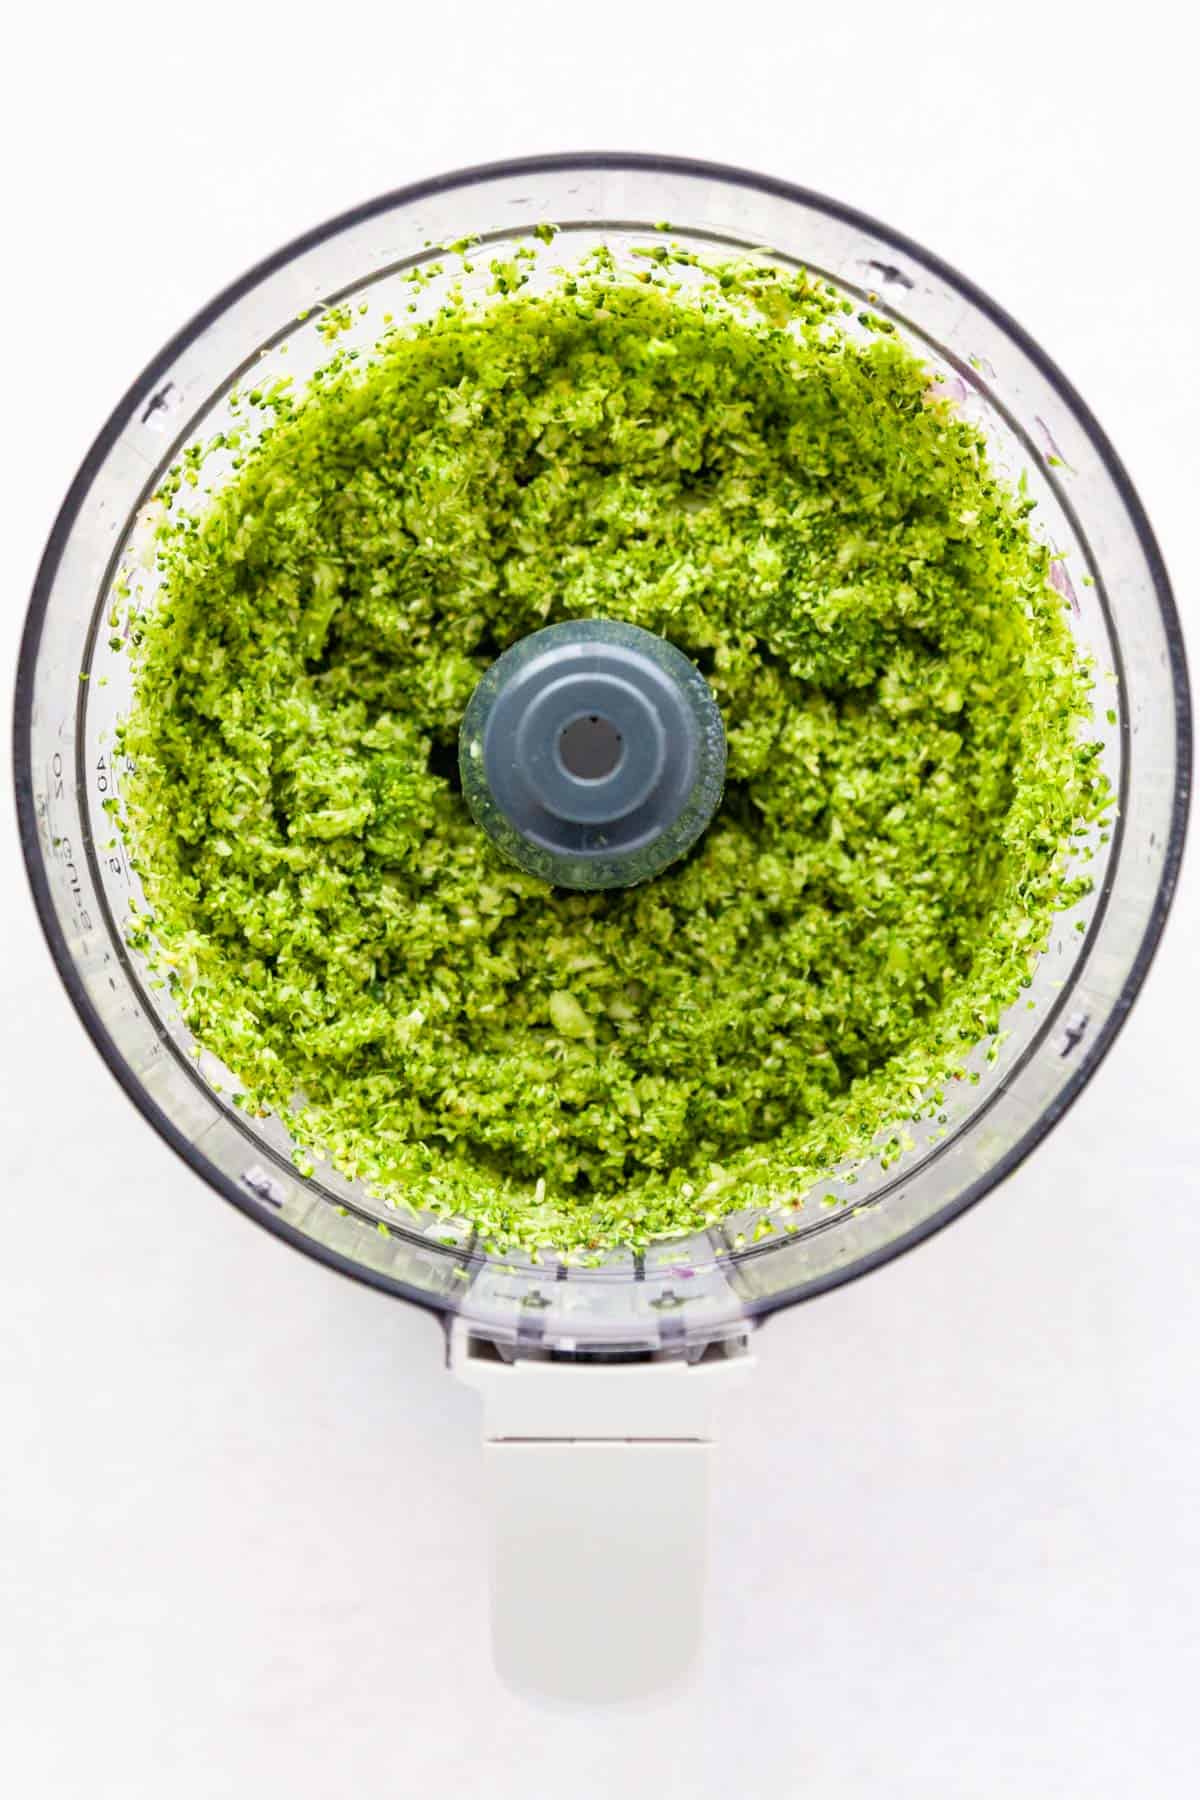 Finely chopped broccoli in a food processor.